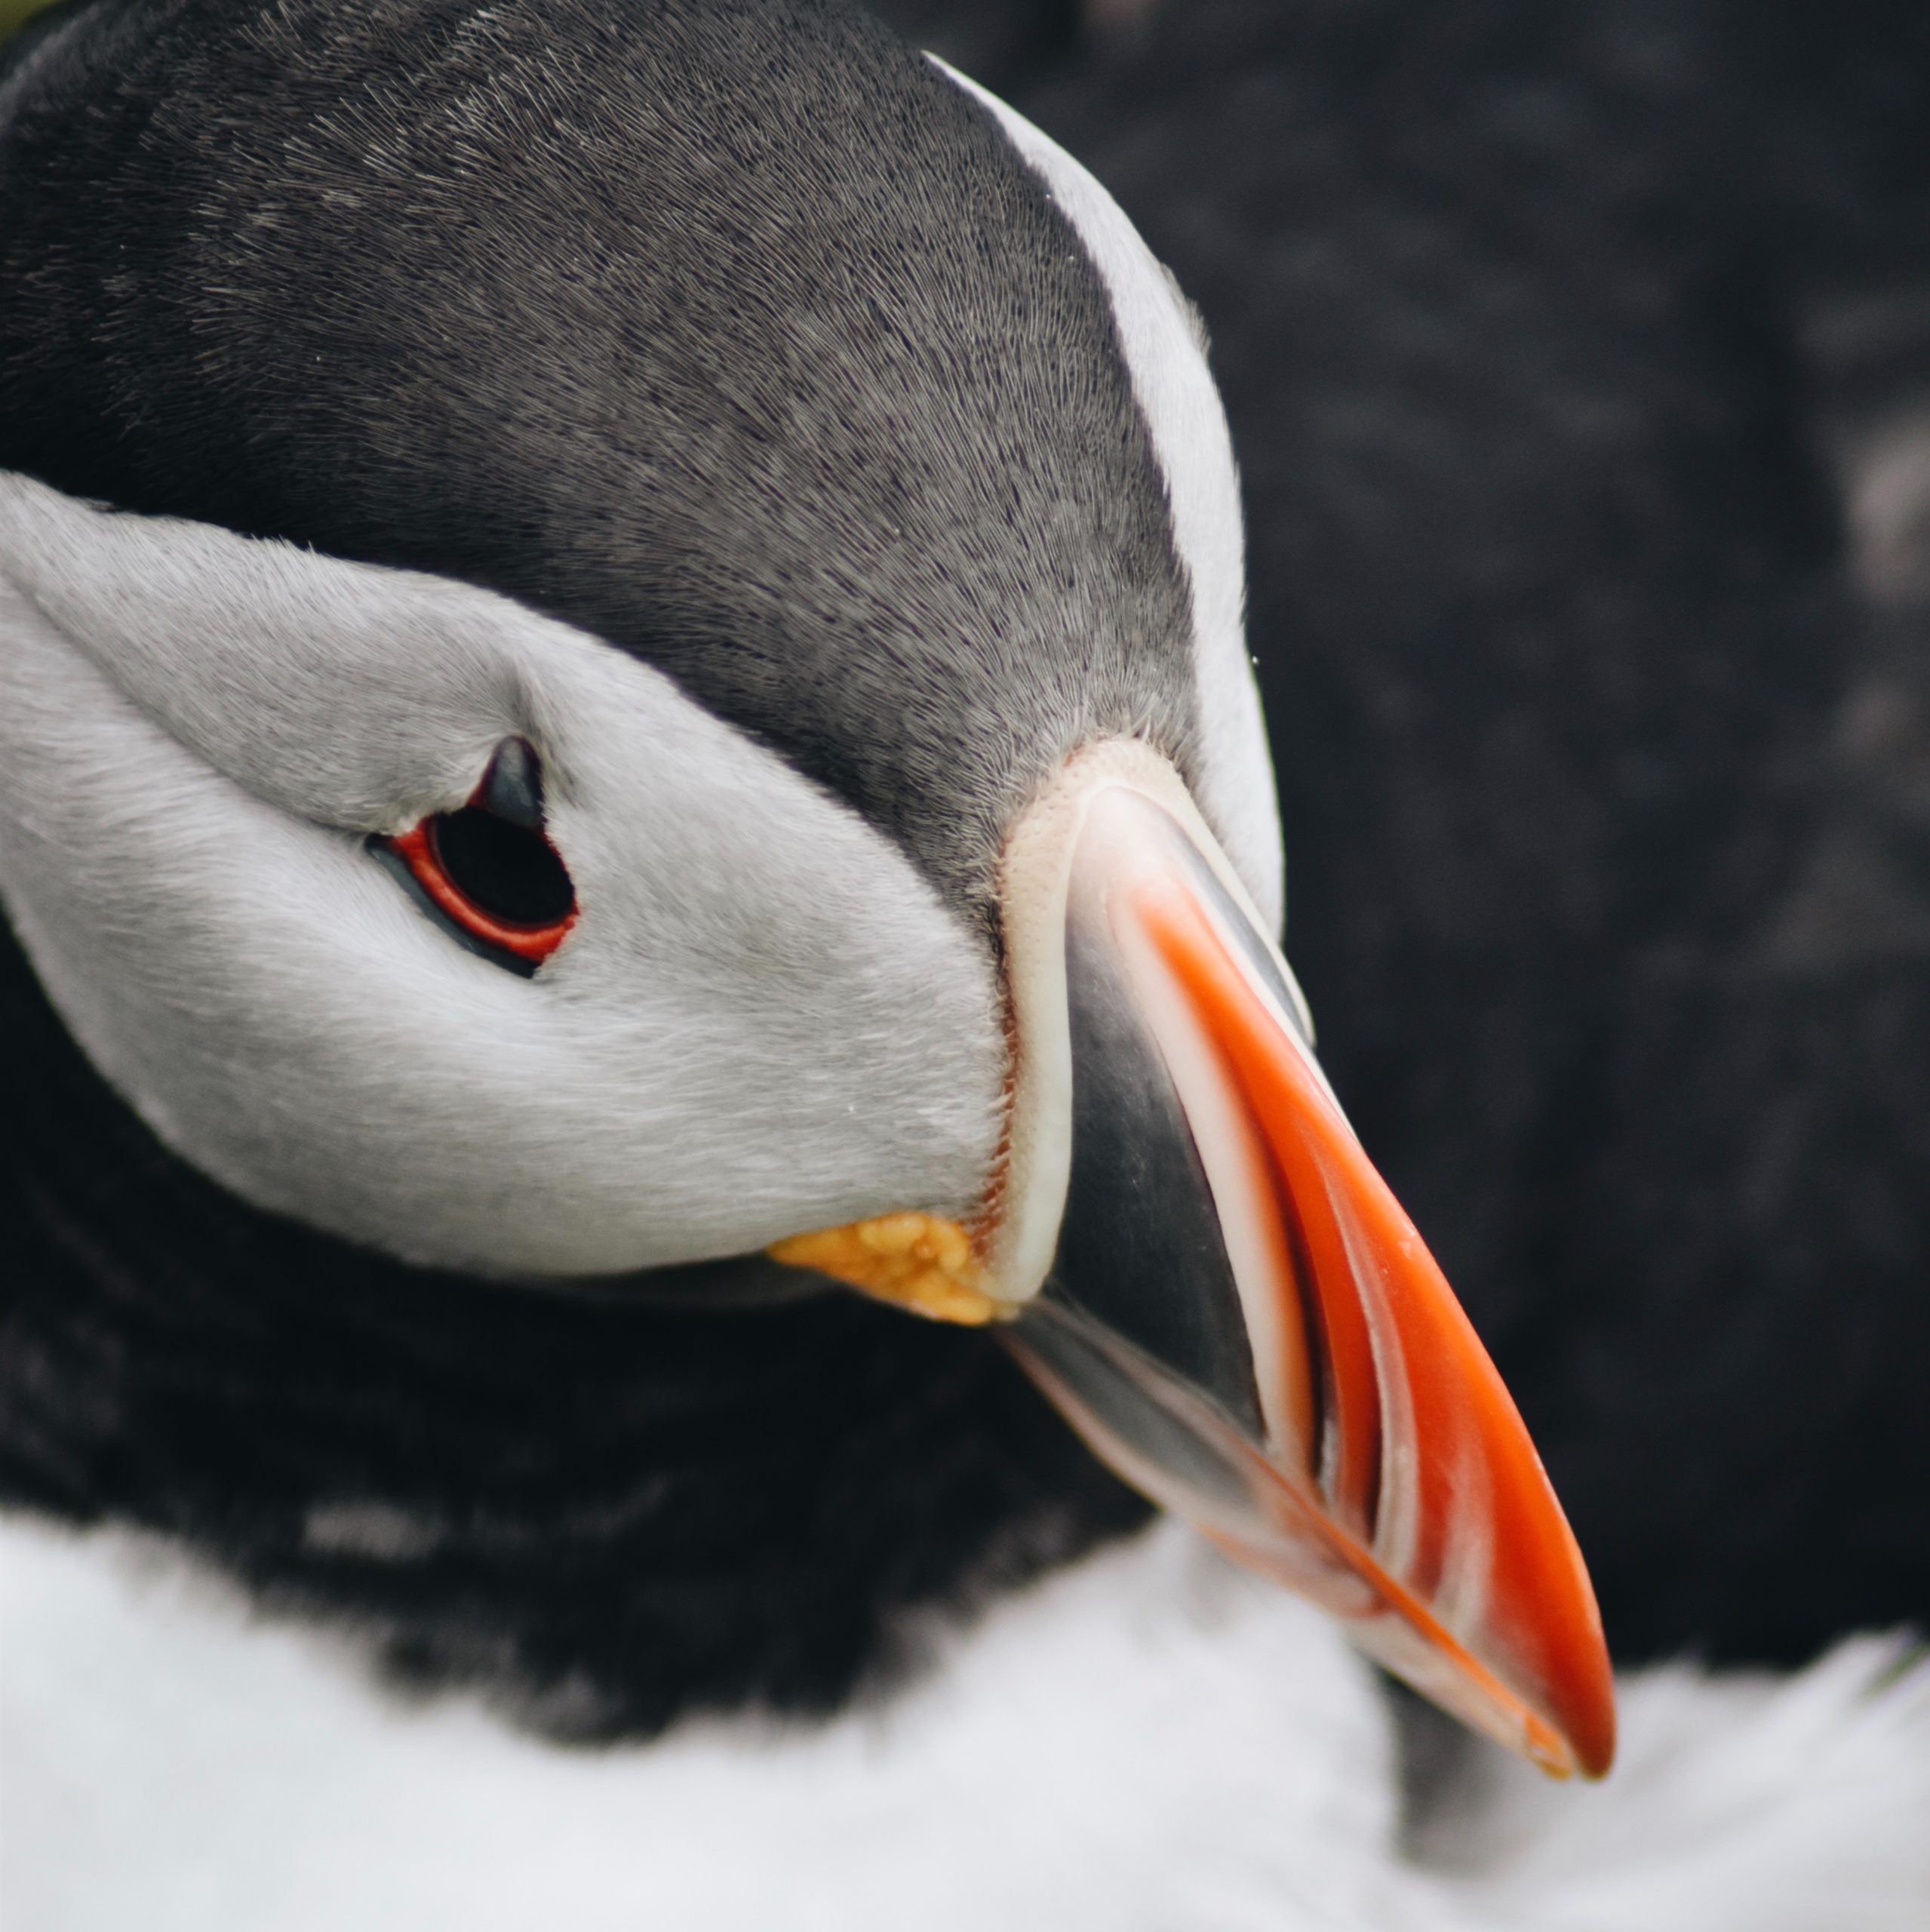 Atlantic Puffins are known for their colourful bills